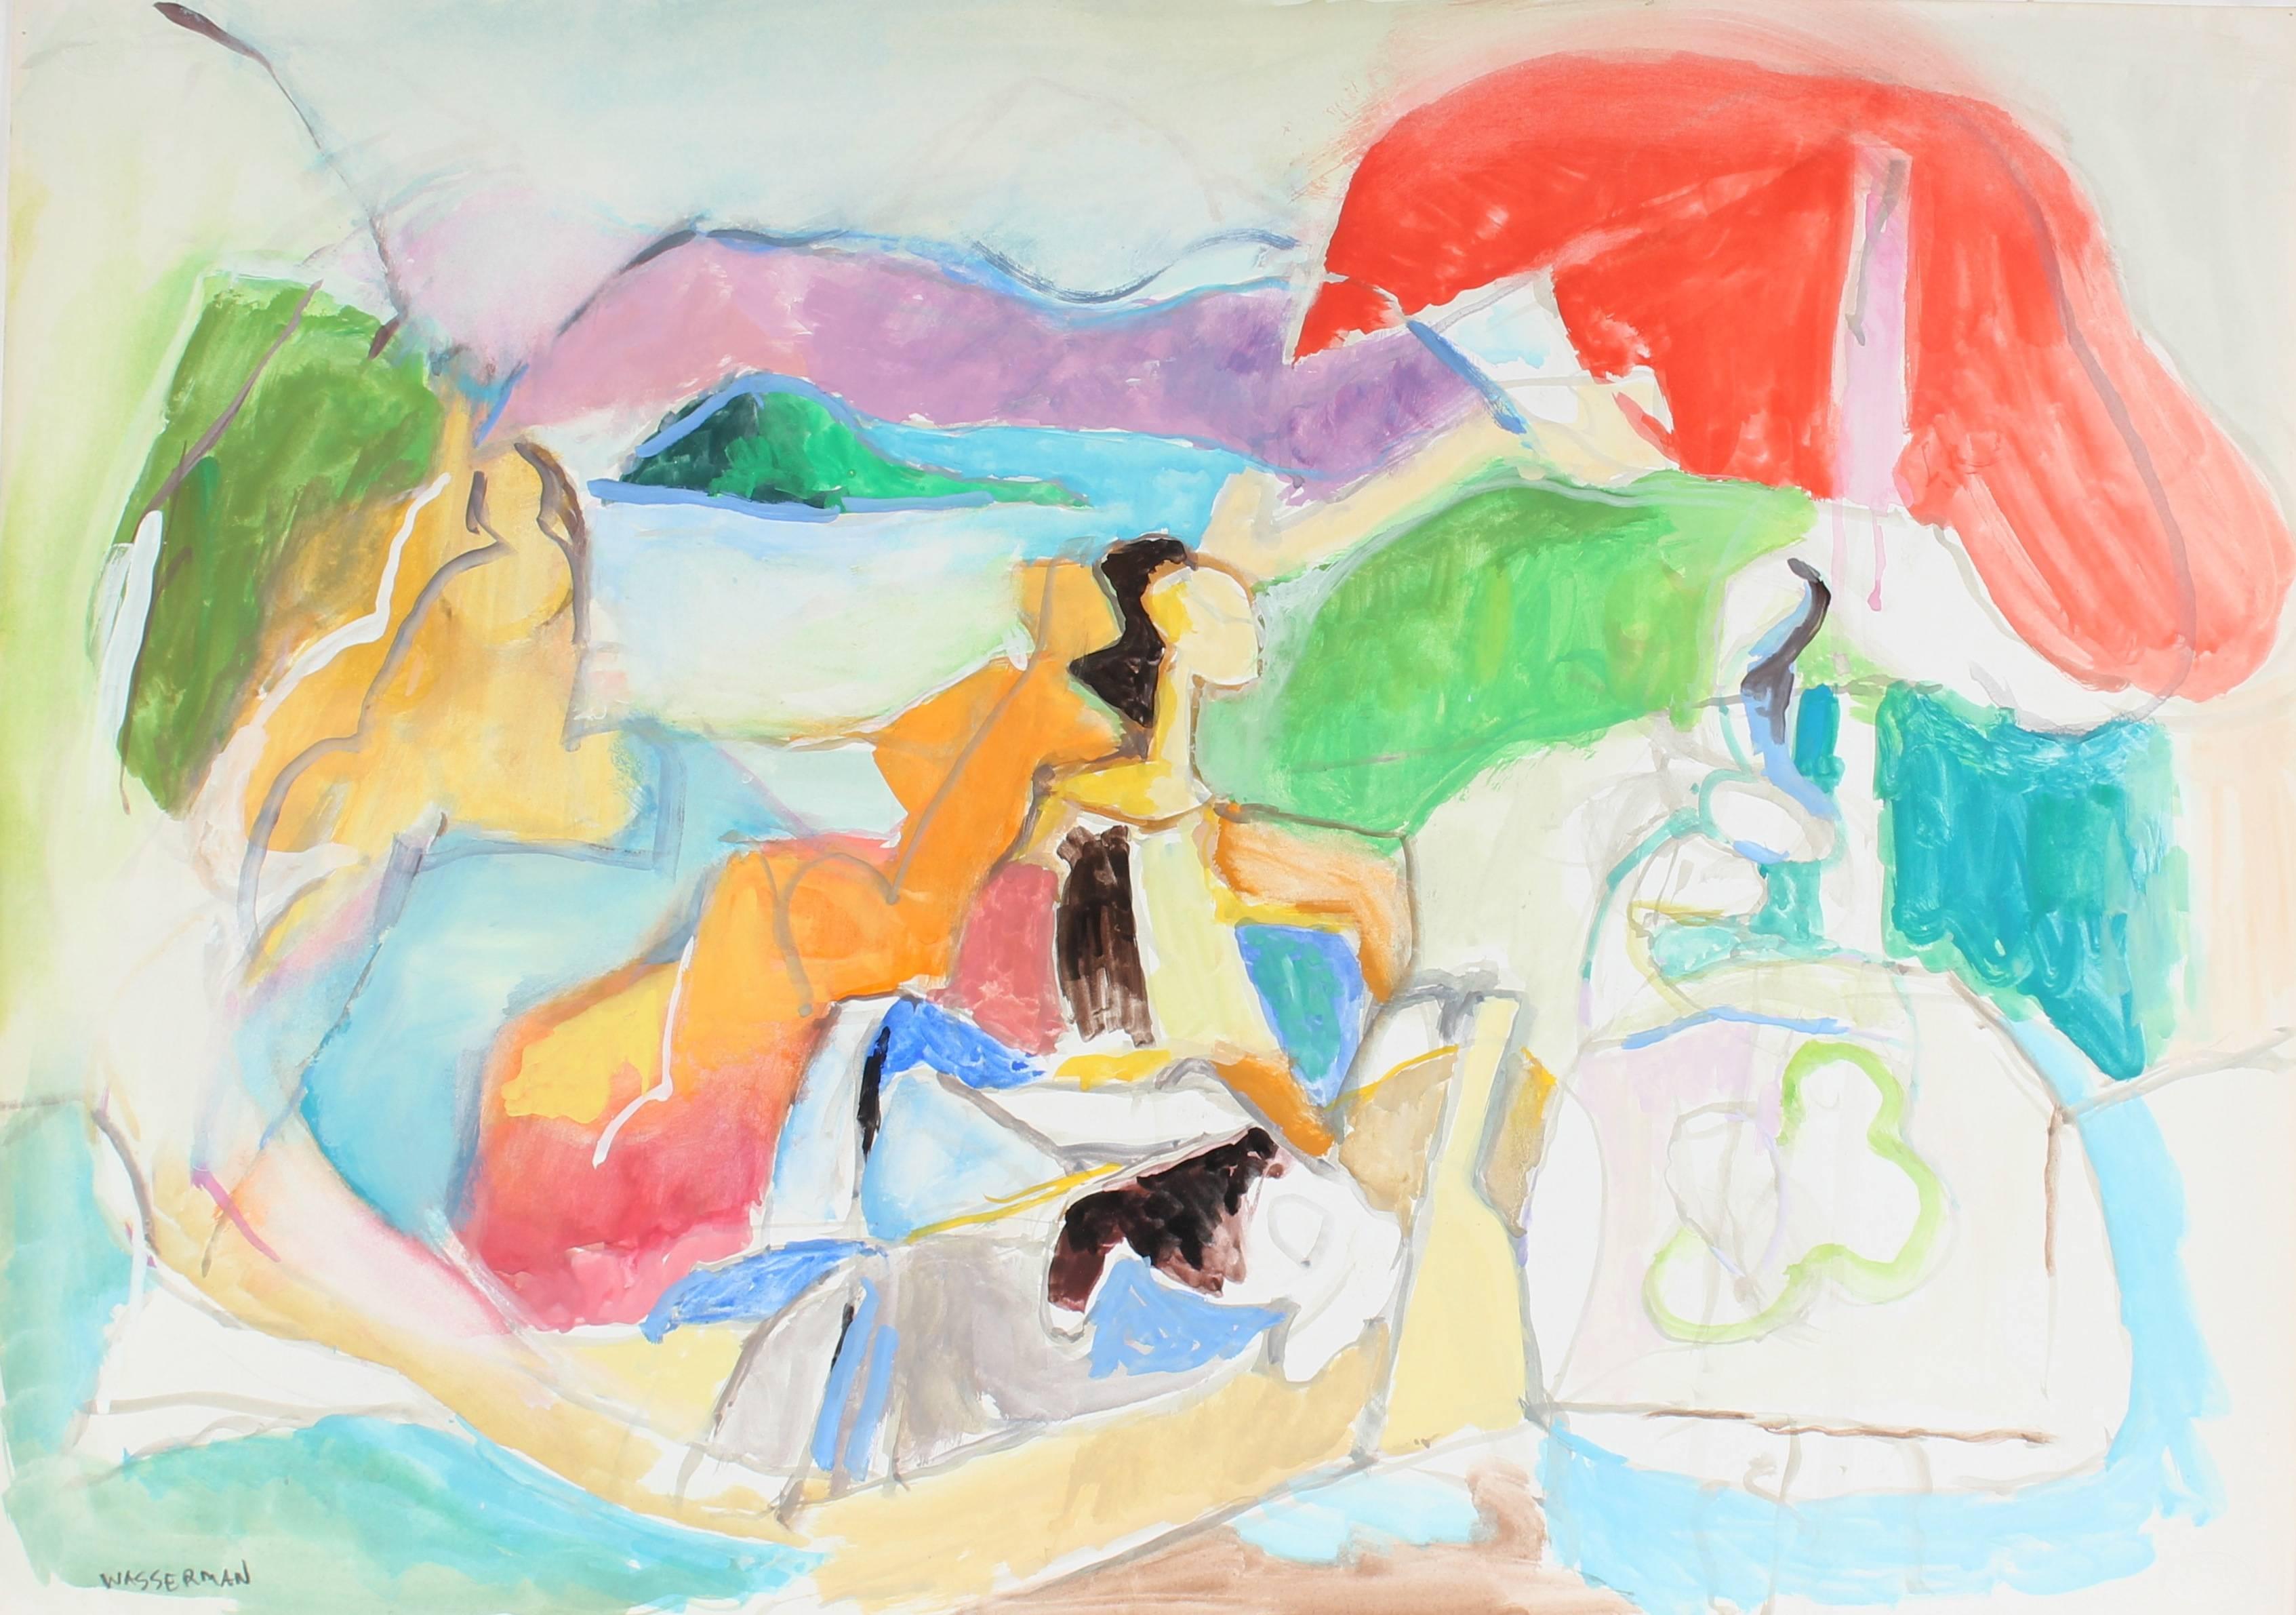 Gerald Wasserman Landscape Painting - "Yugoslavia" Abstracted Figures in a Landscape, Gouache on Paper, 1971